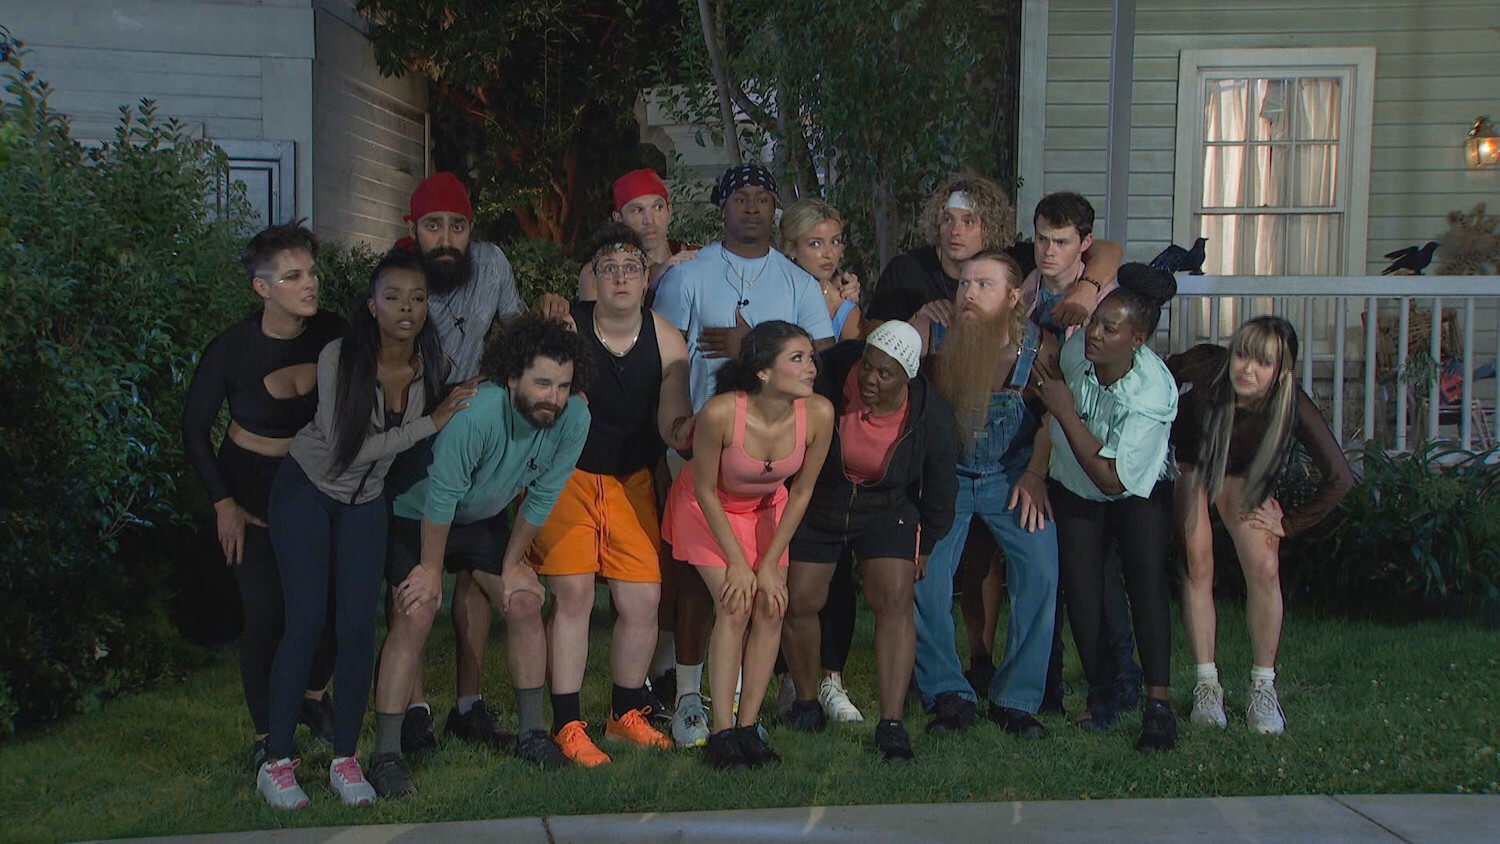 The 'Big Brother' Season 25 cast huddling together in the dark